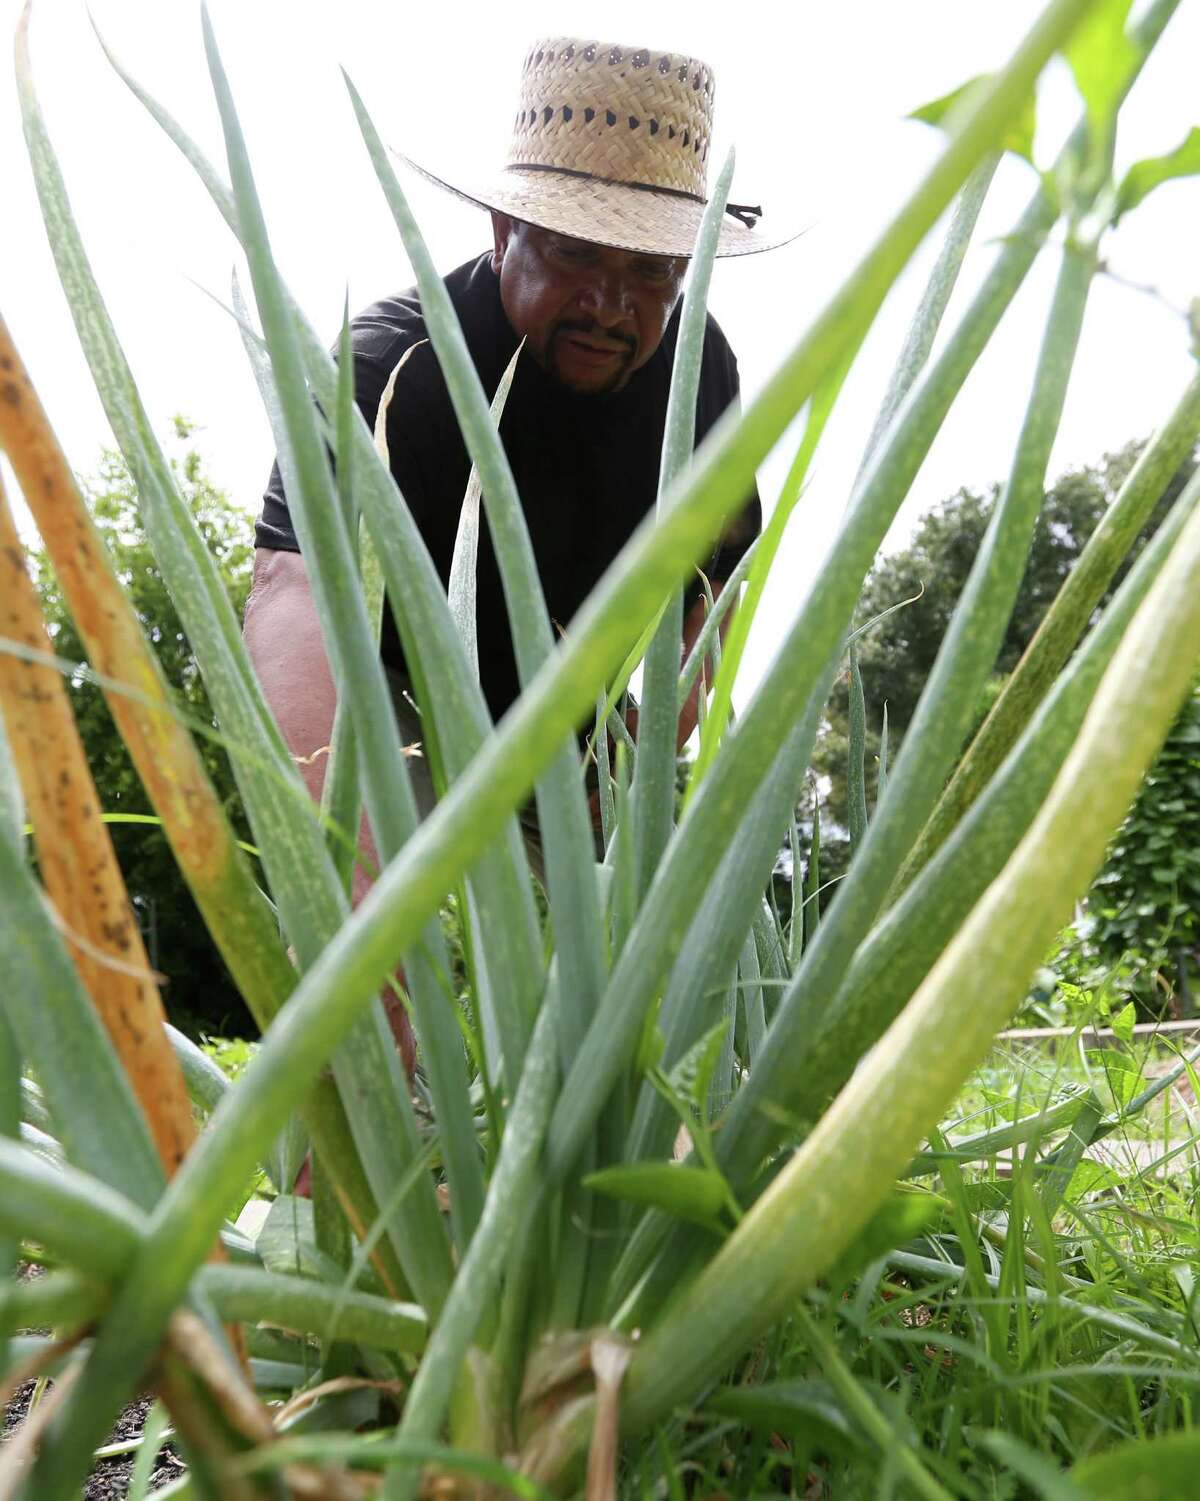 Orlando Hinds inspects an onion plant at Alabama Garden in Third Ward. "I've been gardening since I was 9 years old," he said. "That's when I first got my blisters on my hands."